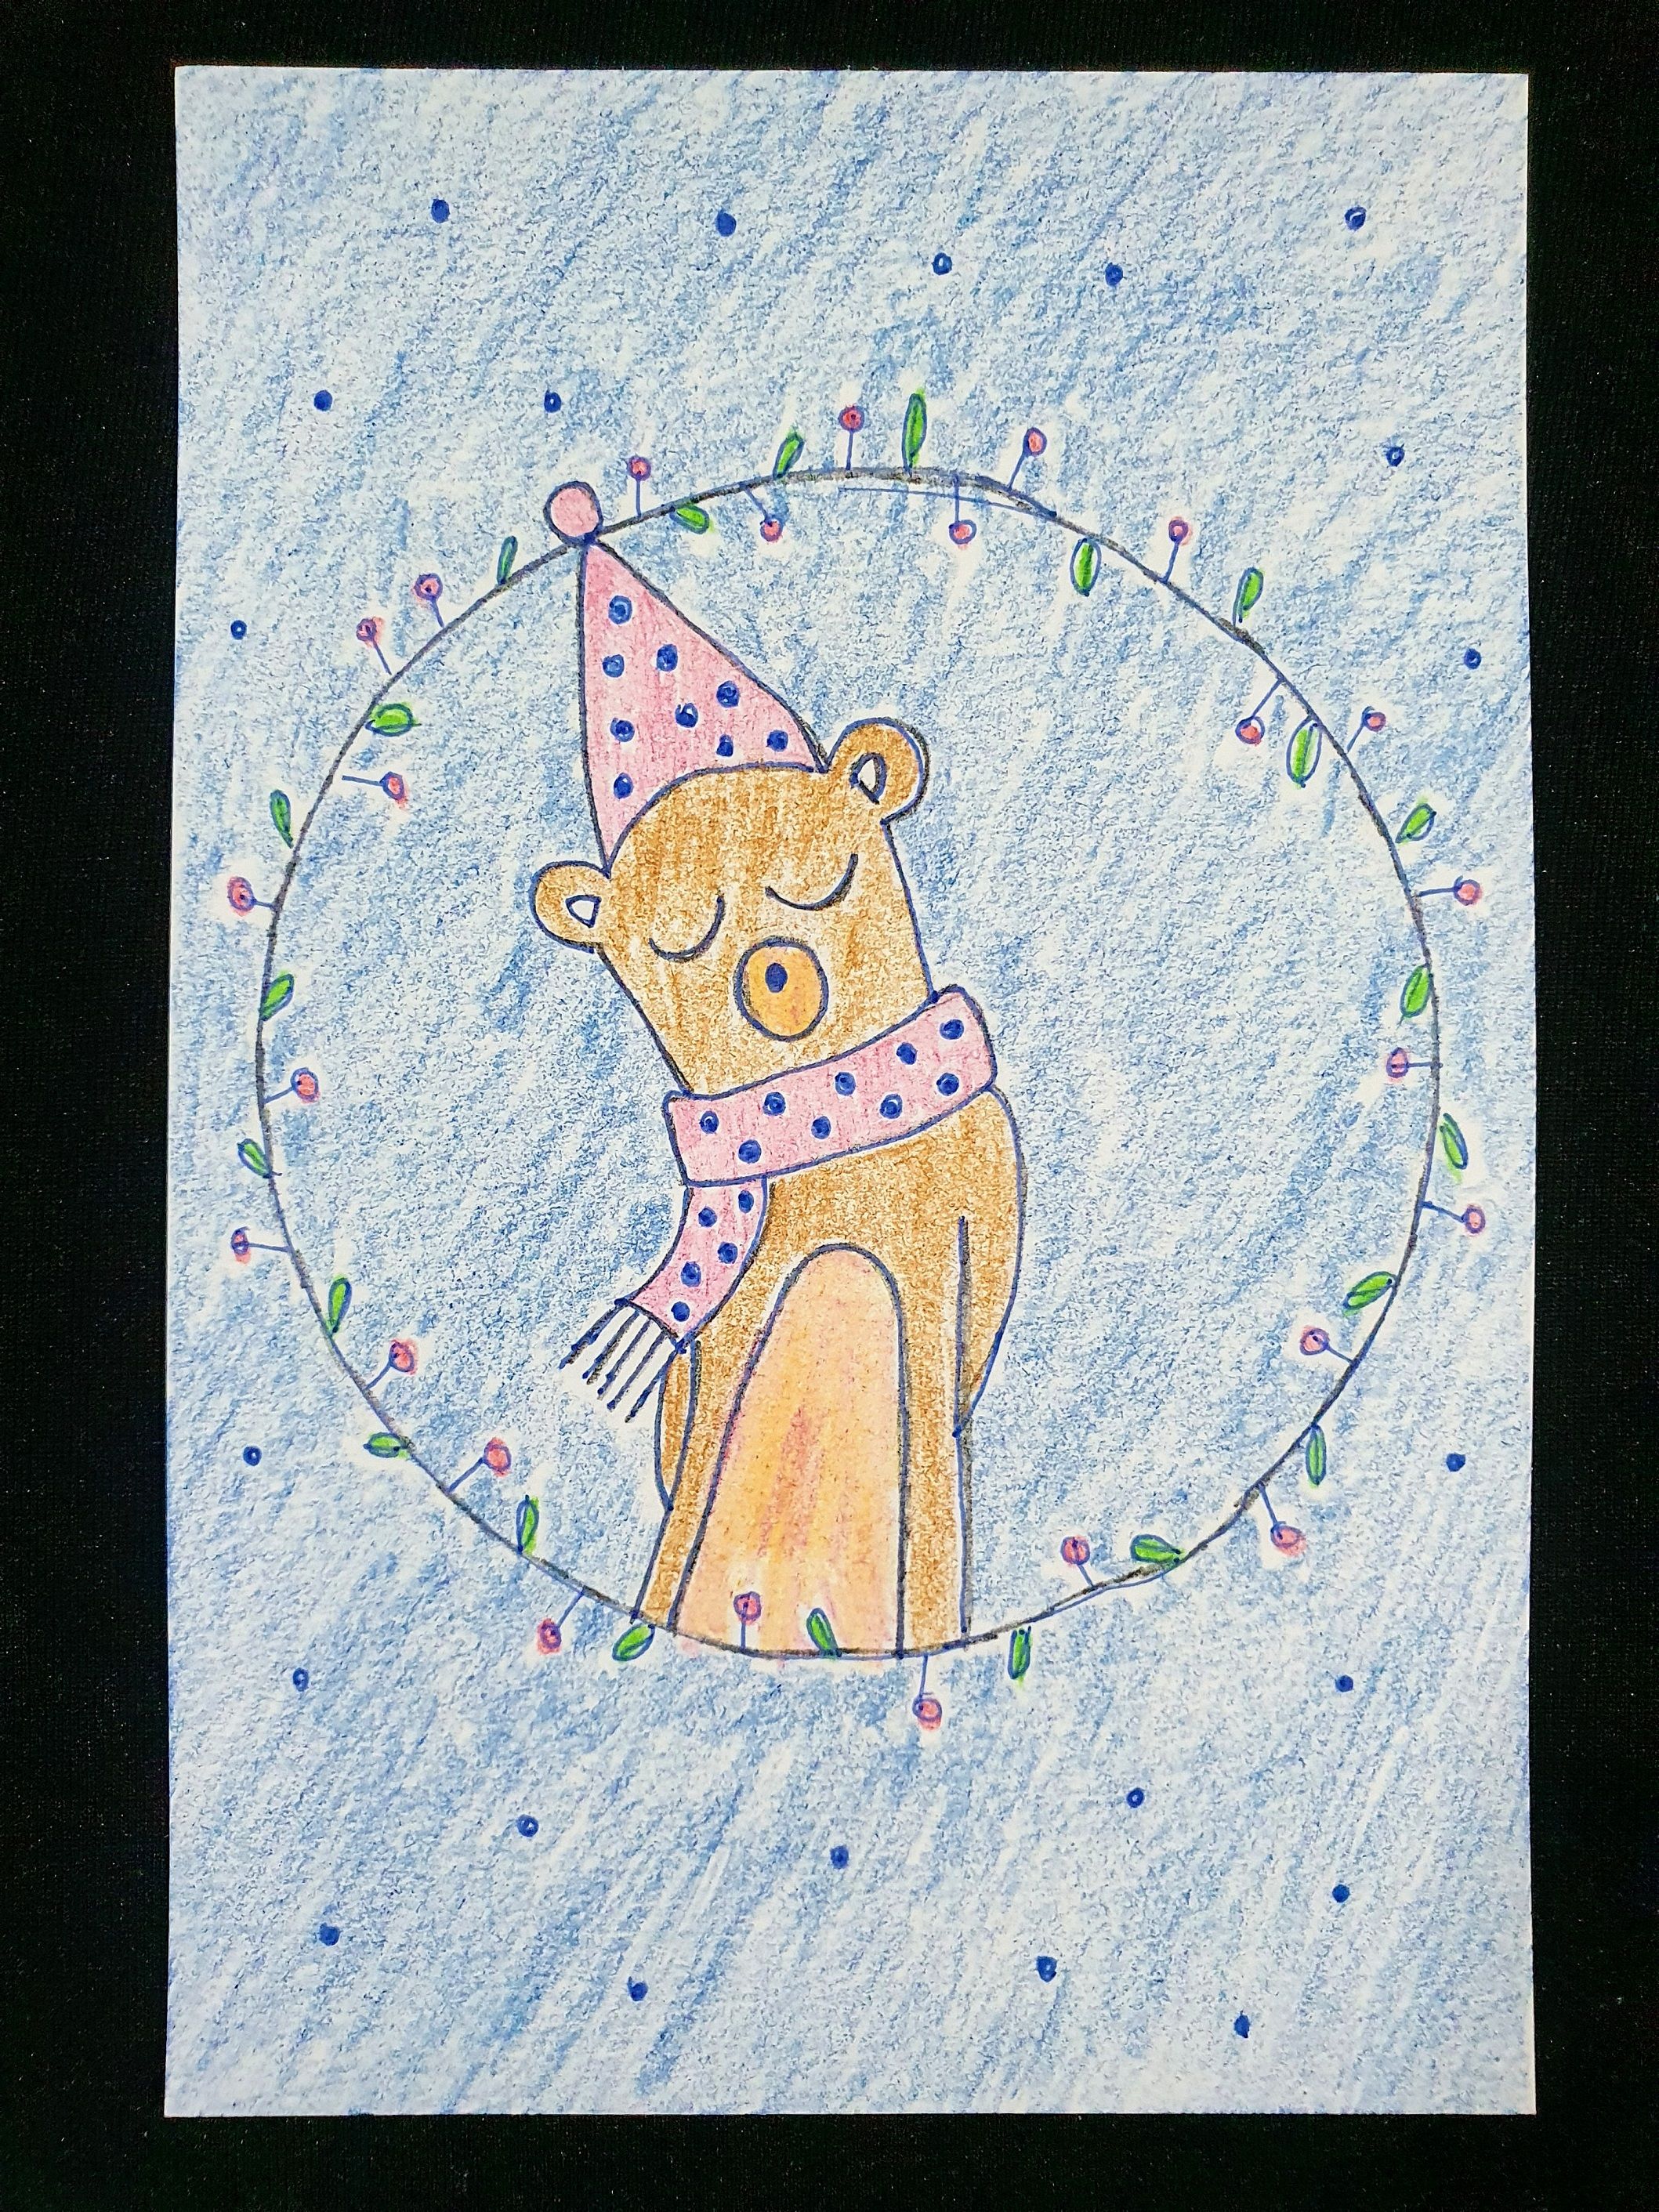 A bear in a wreath - drawing and painting